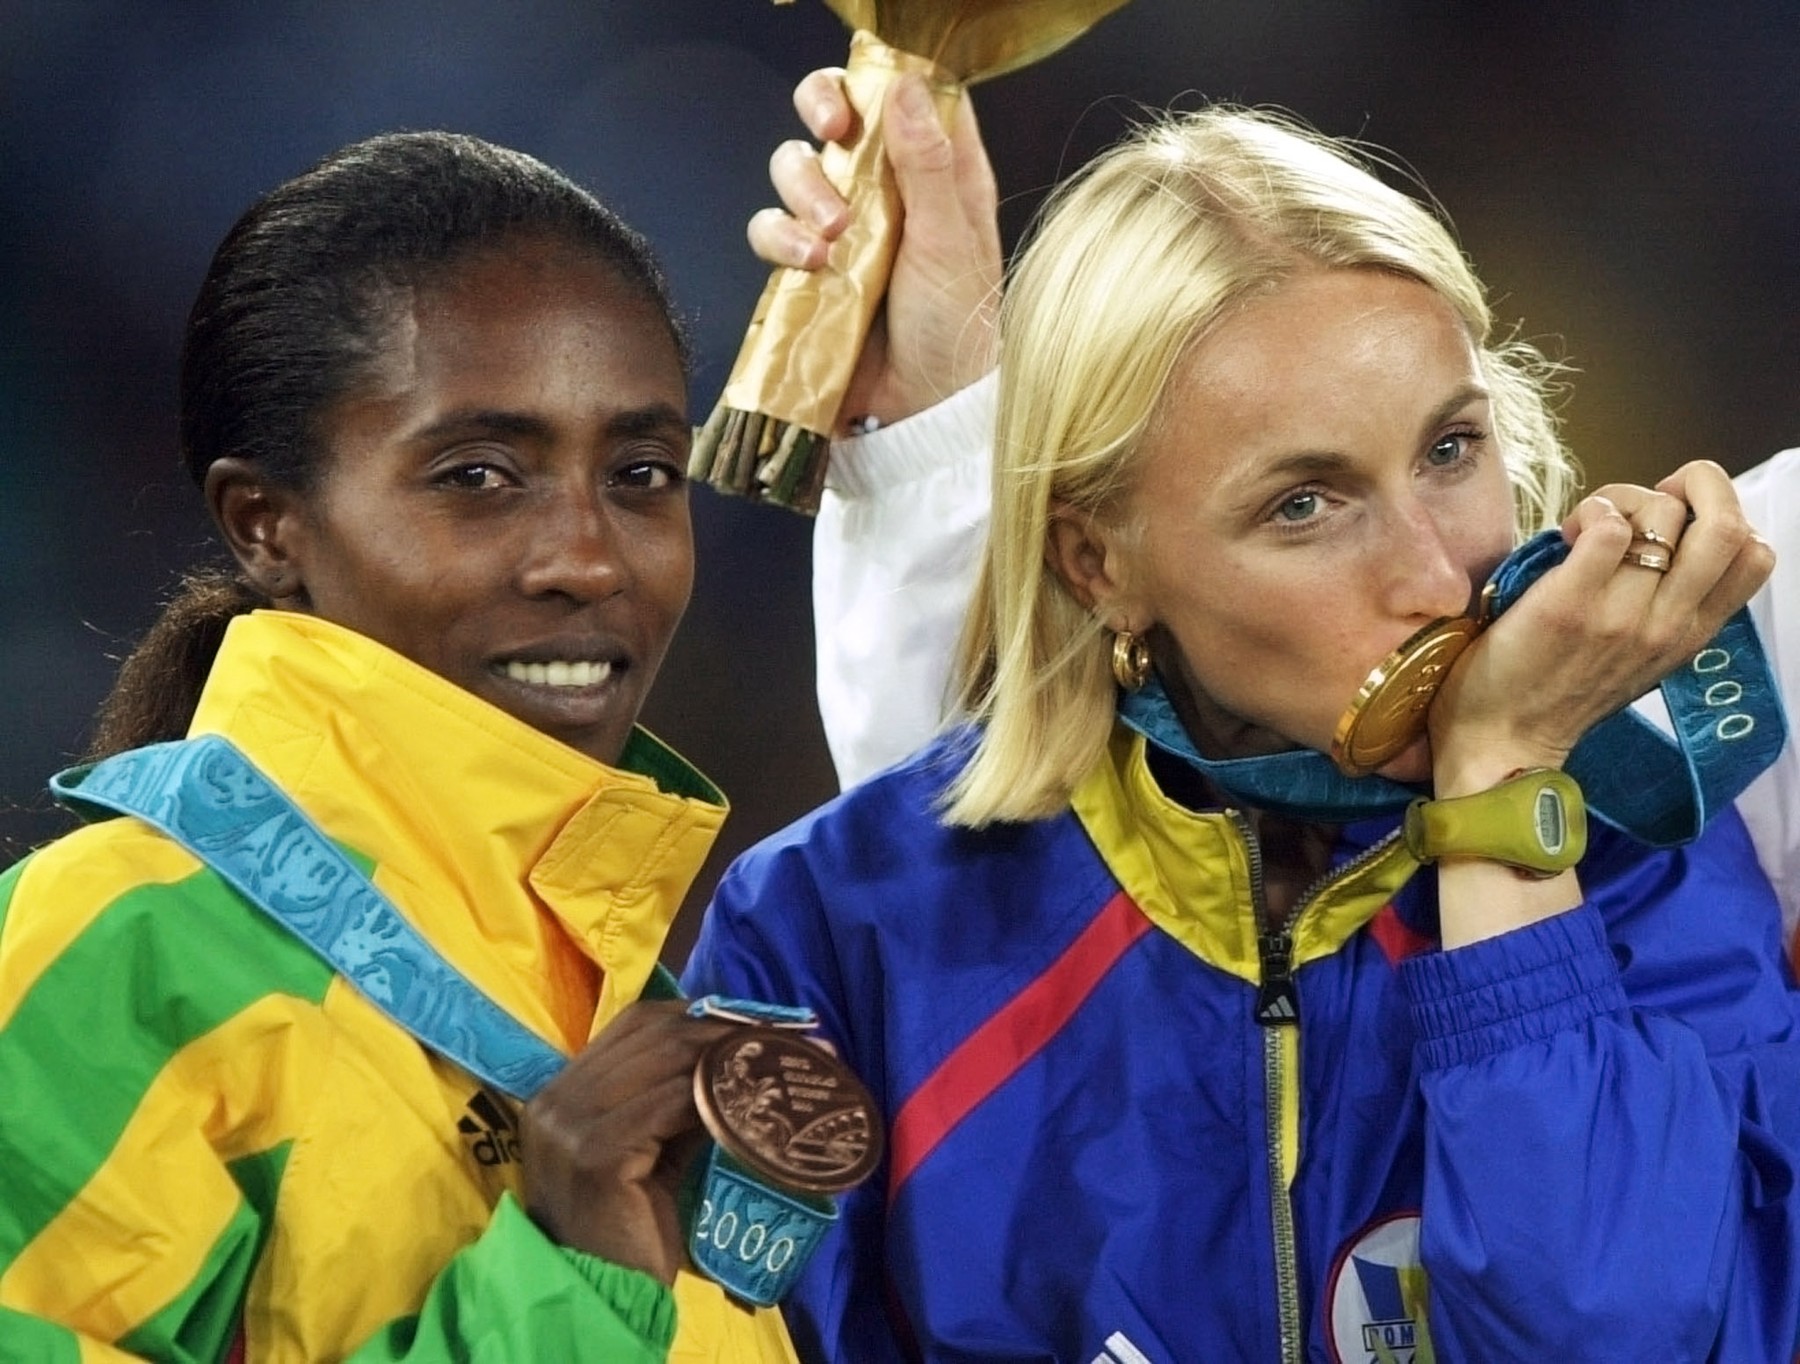 Romanian gold medalist Gabriela Szabo (R) and Ethiopian bronze medalist Gete Wami pose on the podium of the Olympic 5,000m competition in Sydney 25 September 2000.,Image: 68972464, License: Rights-managed, Restrictions: , Model Release: no, Credit line: Profimedia